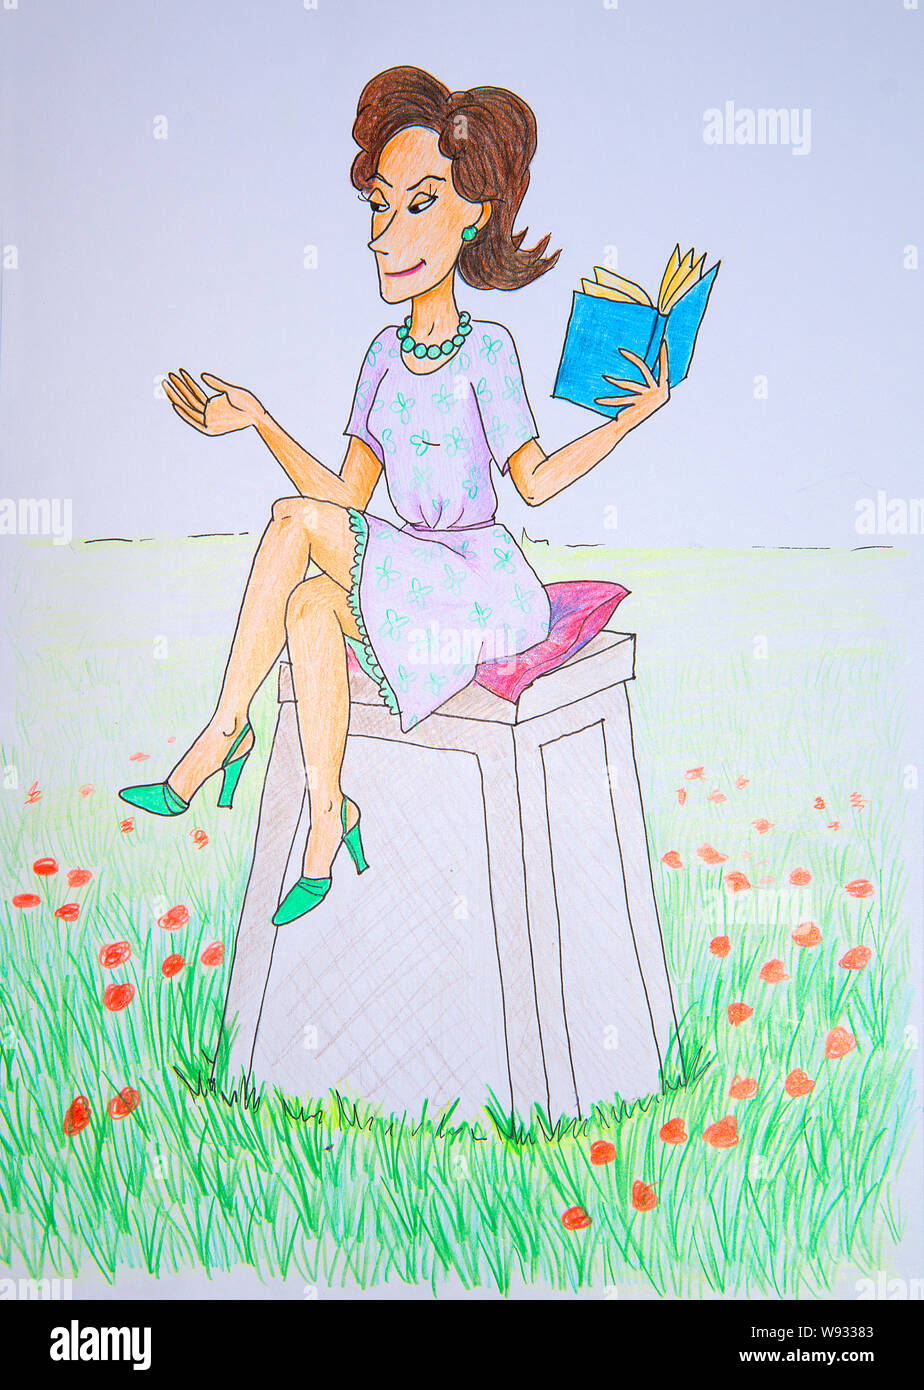 Mature woman sitting on a pedestal, holding a book. Illustration. Stock Photo